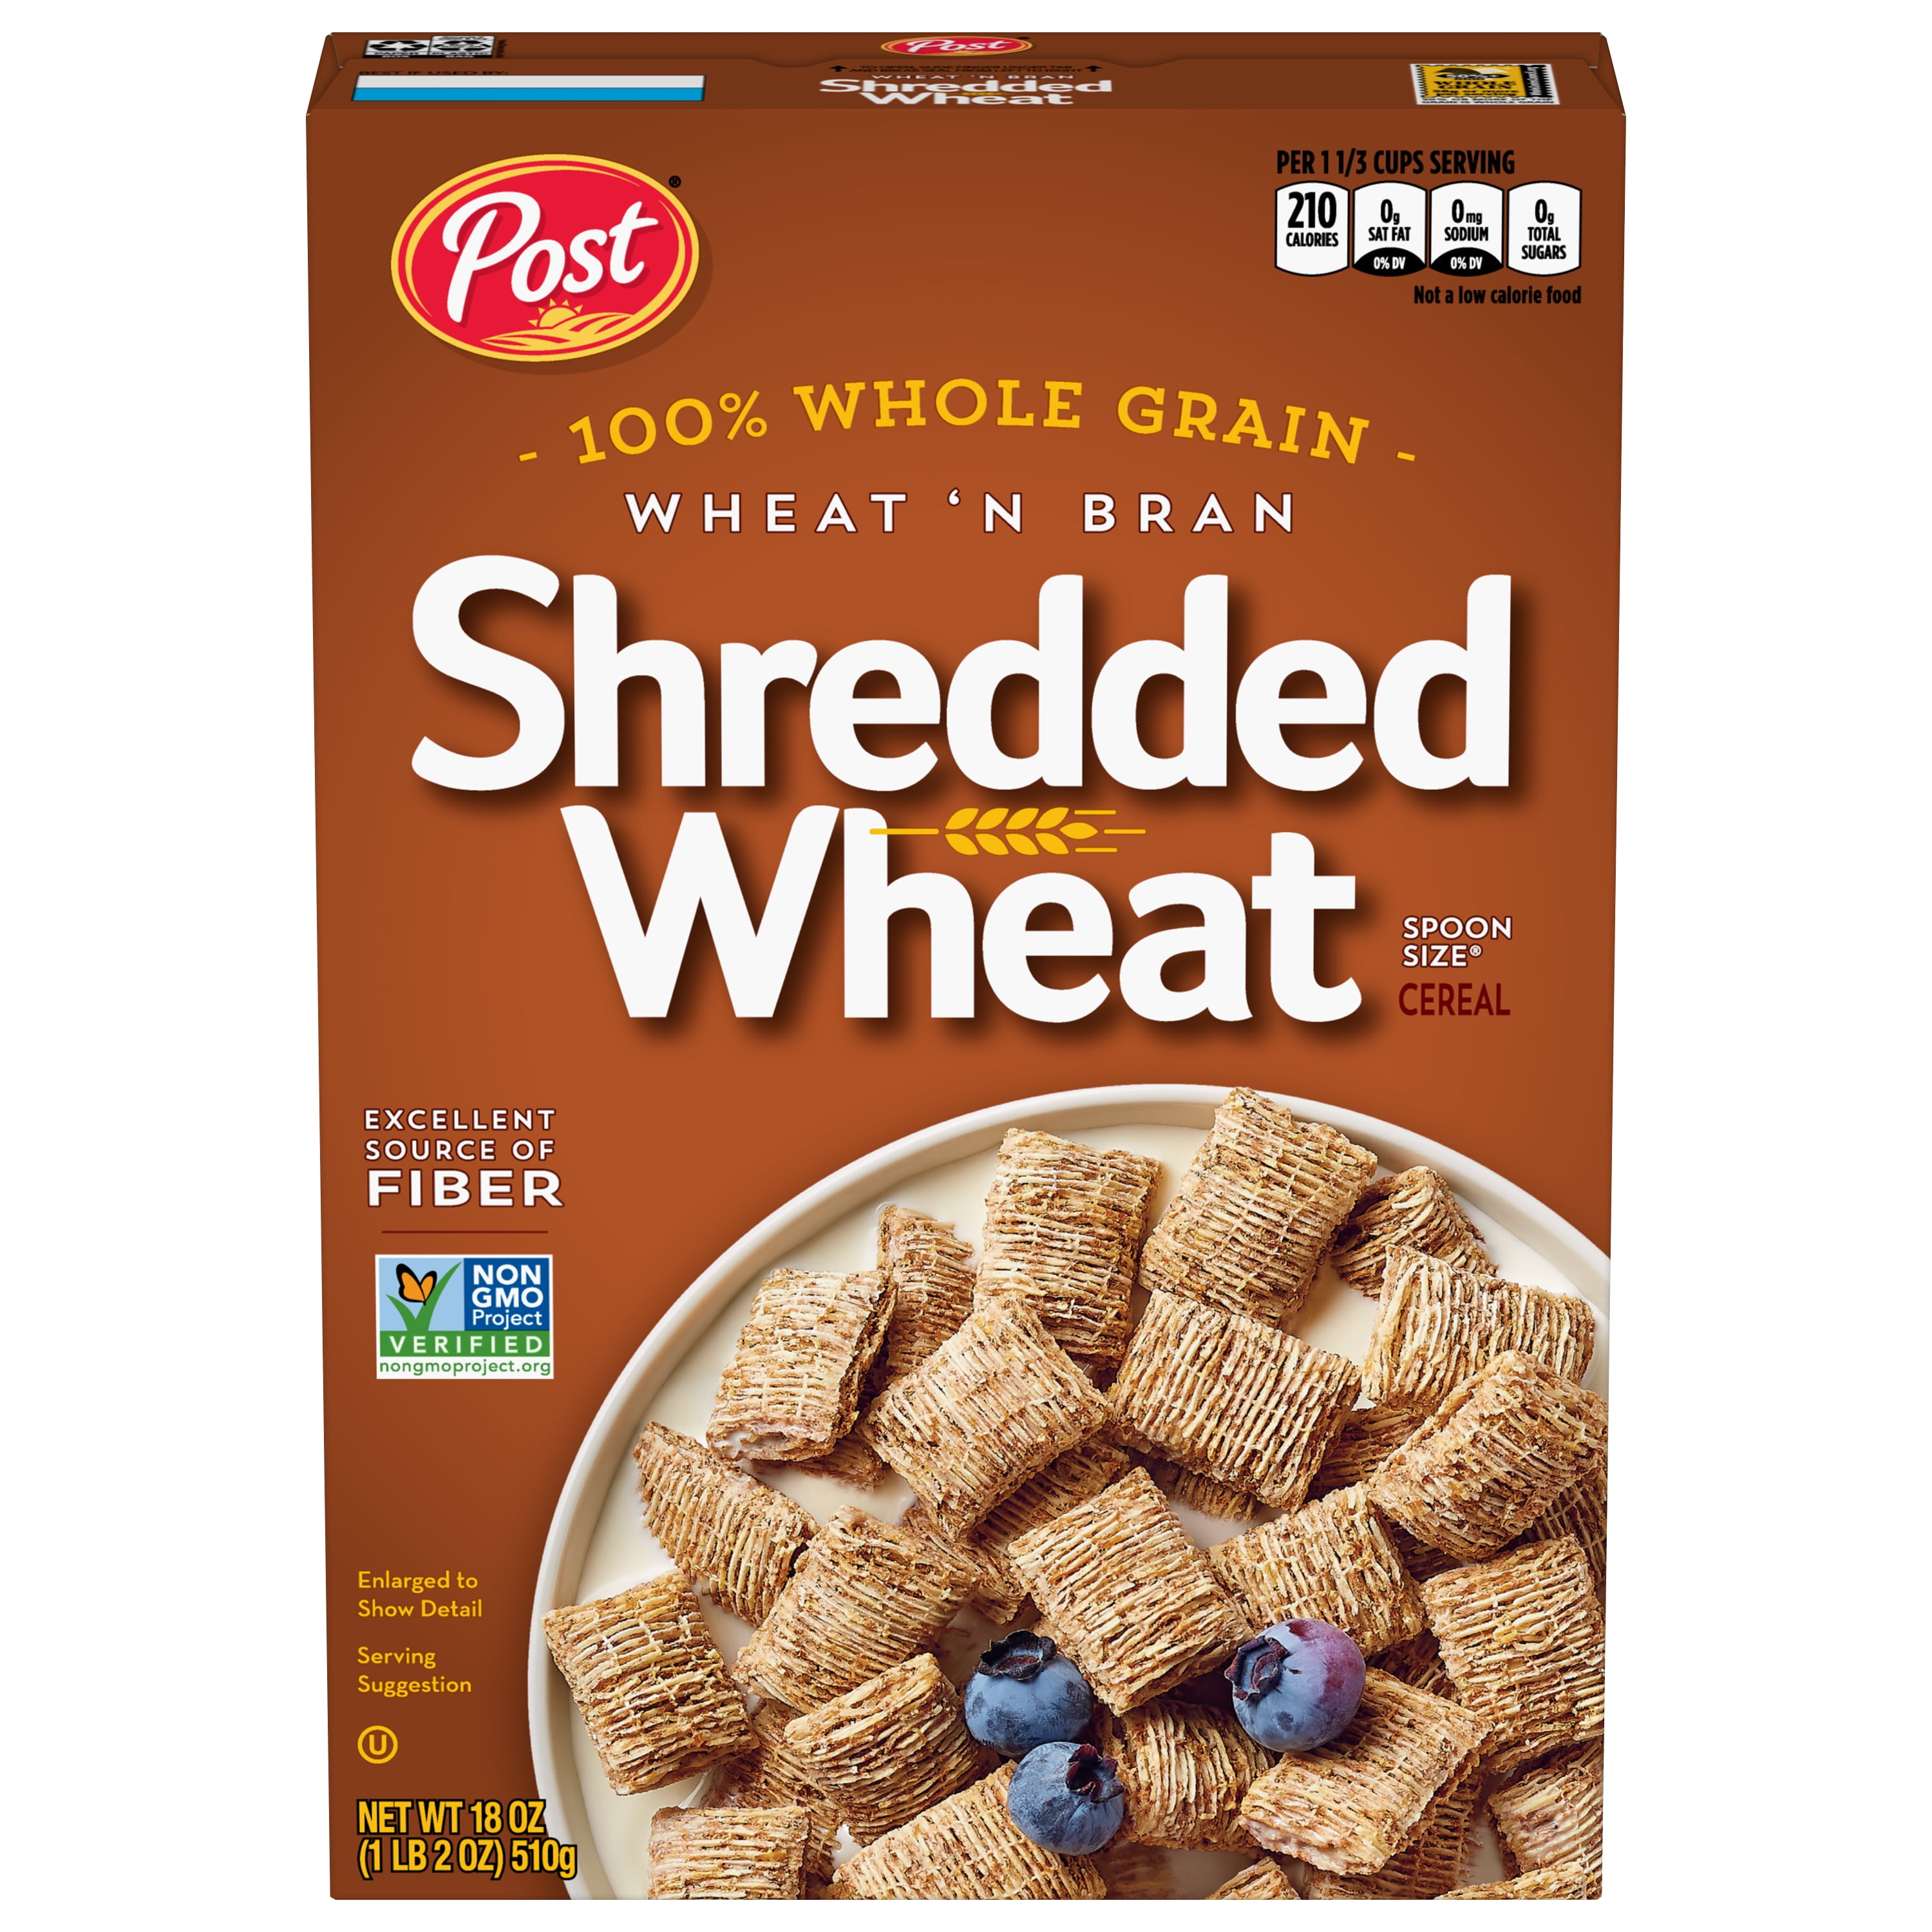 Post Wheat n Bran Shredded Wheat, Breakfast Cereal, Excellent Source of Fiber, Kosher 18 Ounce  1 count